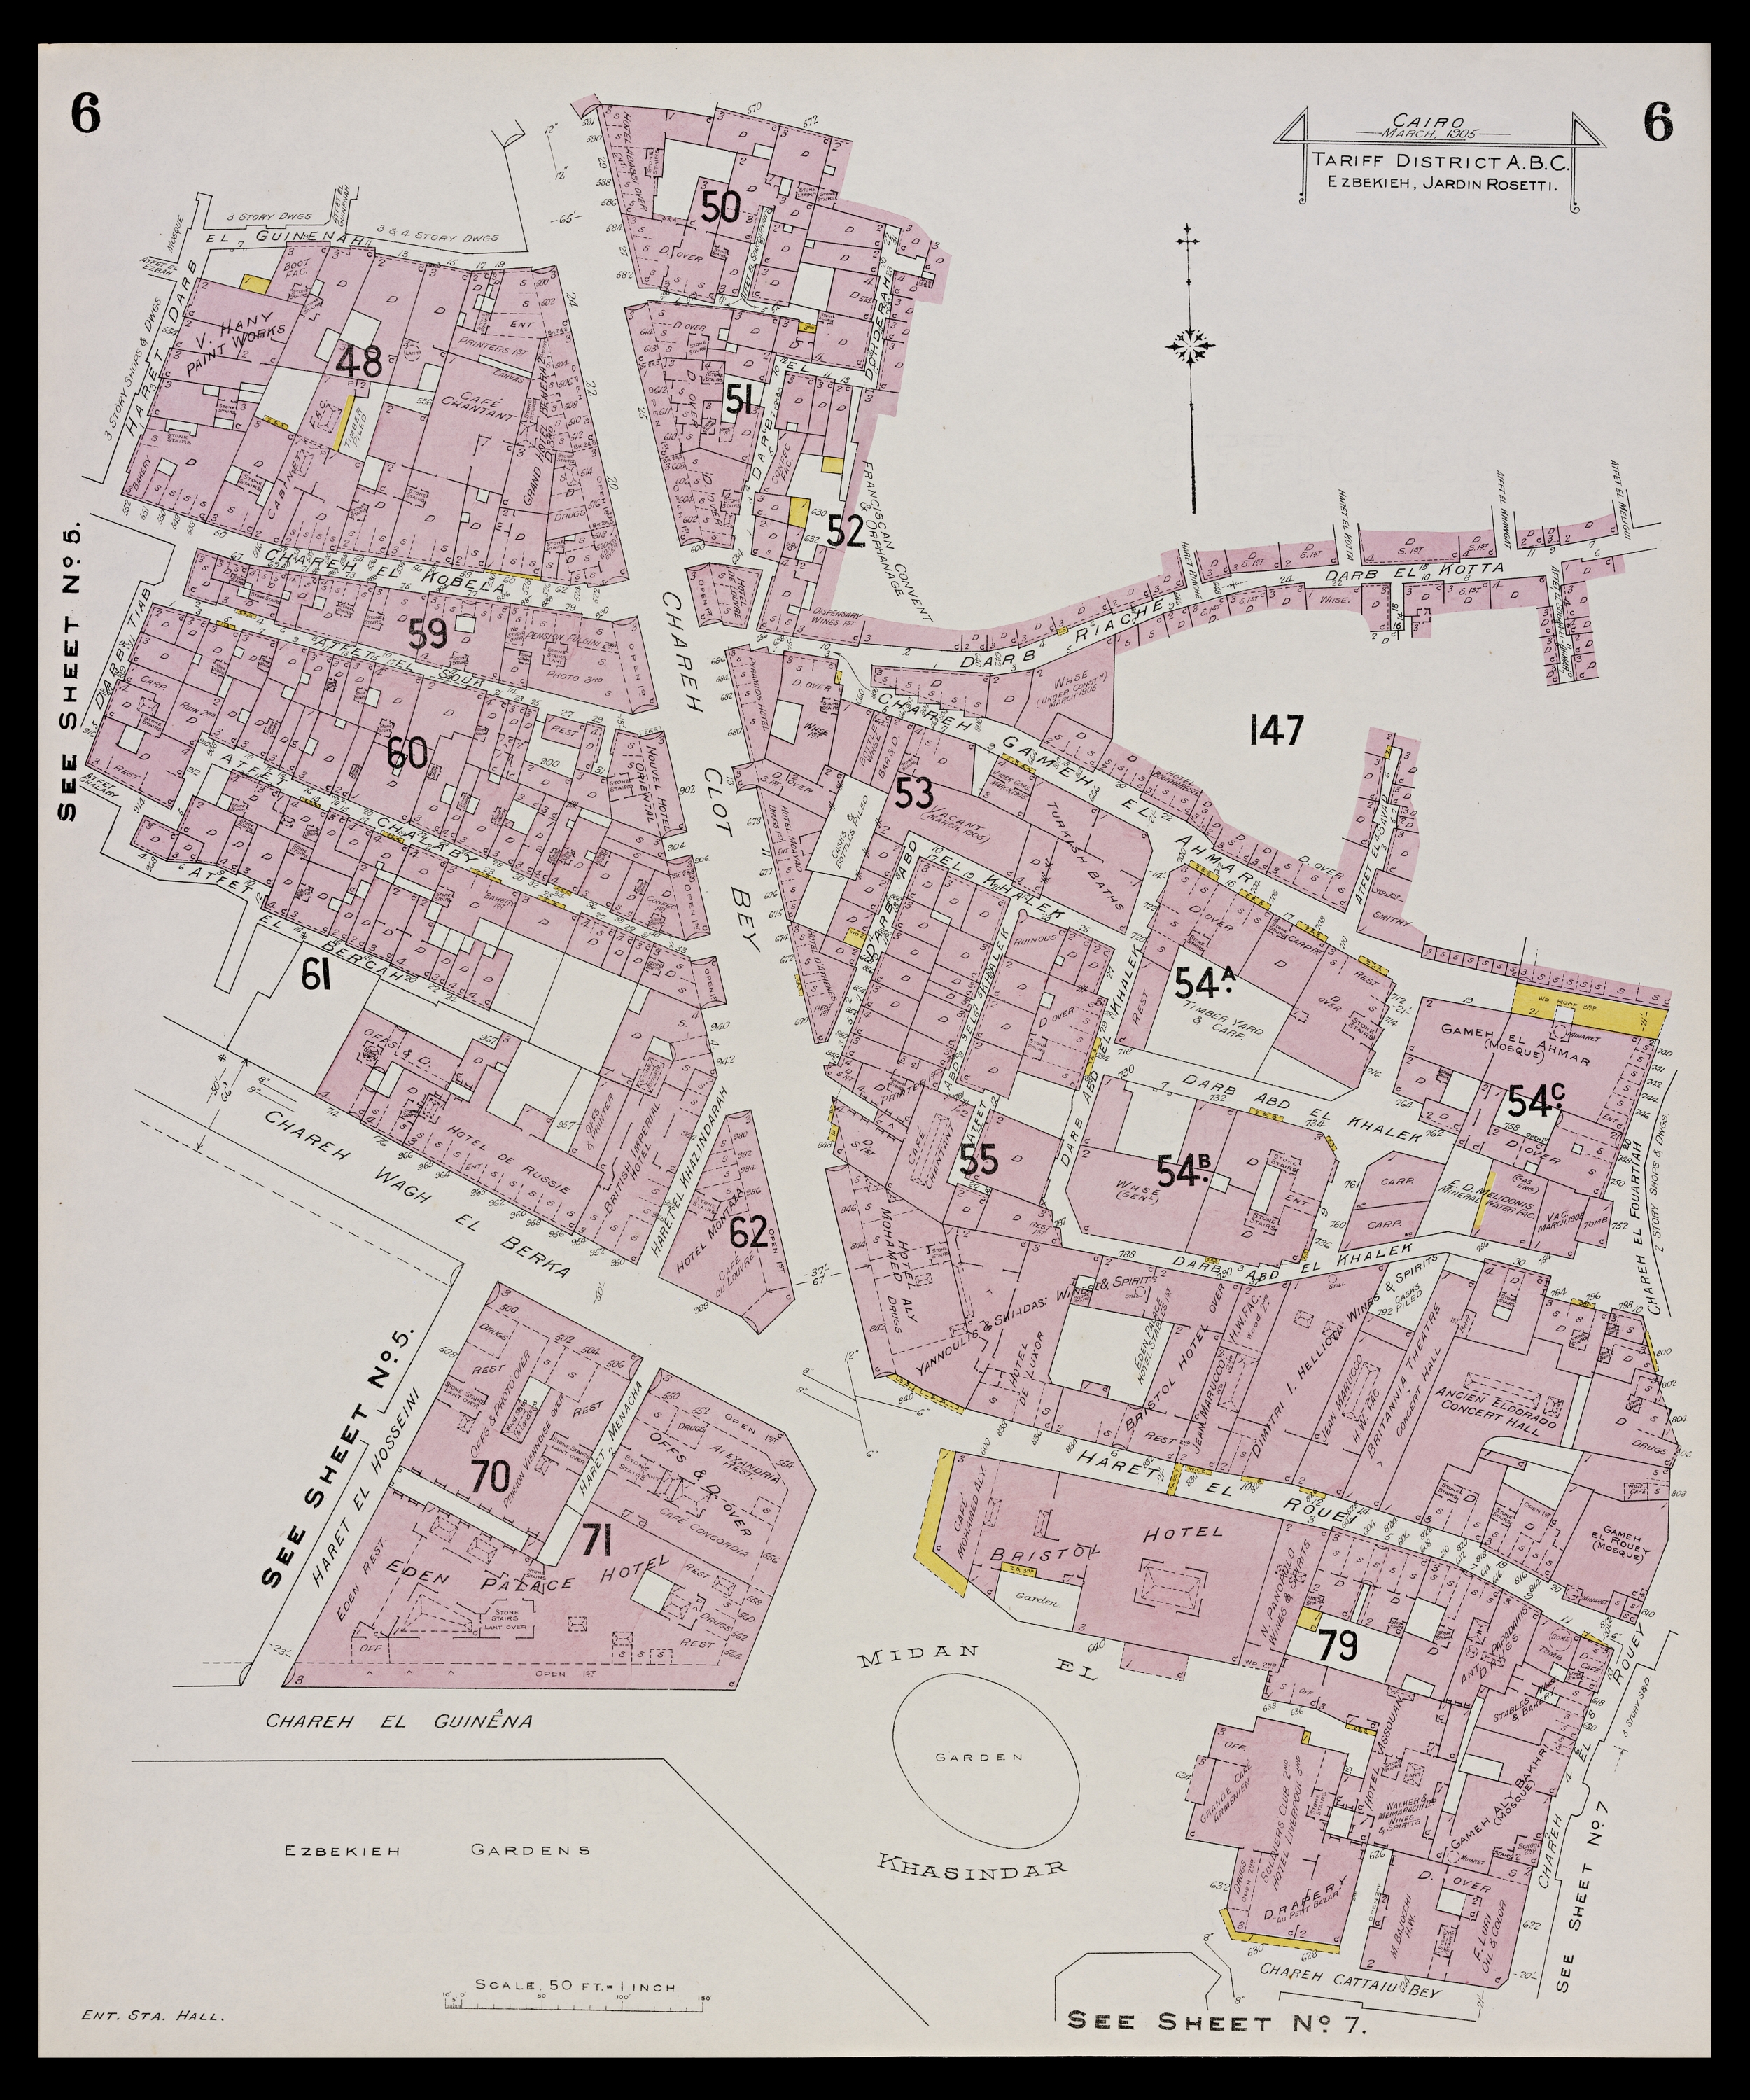 Charles E. Goad - <span style="color: rgb(1, 1, 1); line-height: 16px;">A sheet from the&nbsp;</span><span style="color: rgb(1, 1, 1); line-height: 16px; font-style: italic;">Insurance Plan of Cairo</span><span style="color: rgb(1, 1, 1); line-height: 16px;">. The complete set of plans can be found on&nbsp;</span><a href="http://archnet.org/publications/10218" target="_blank" data-bypass="true" style="line-height: 16px;">Archnet</a><span style="color: rgb(1, 1, 1); line-height: 16px;">, or as georeferenced versions in the&nbsp;</span><a href="http://calvert.hul.harvard.edu:8080/opengeoportal/openGeoPortalHome.jsp?BasicSearchTerm=ExternalLayerId:1246" target="_blank" data-bypass="true" style="line-height: 16px;">Harvard Geospatial Library</a><span style="color: rgb(1, 1, 1); line-height: 16px;">.</span>